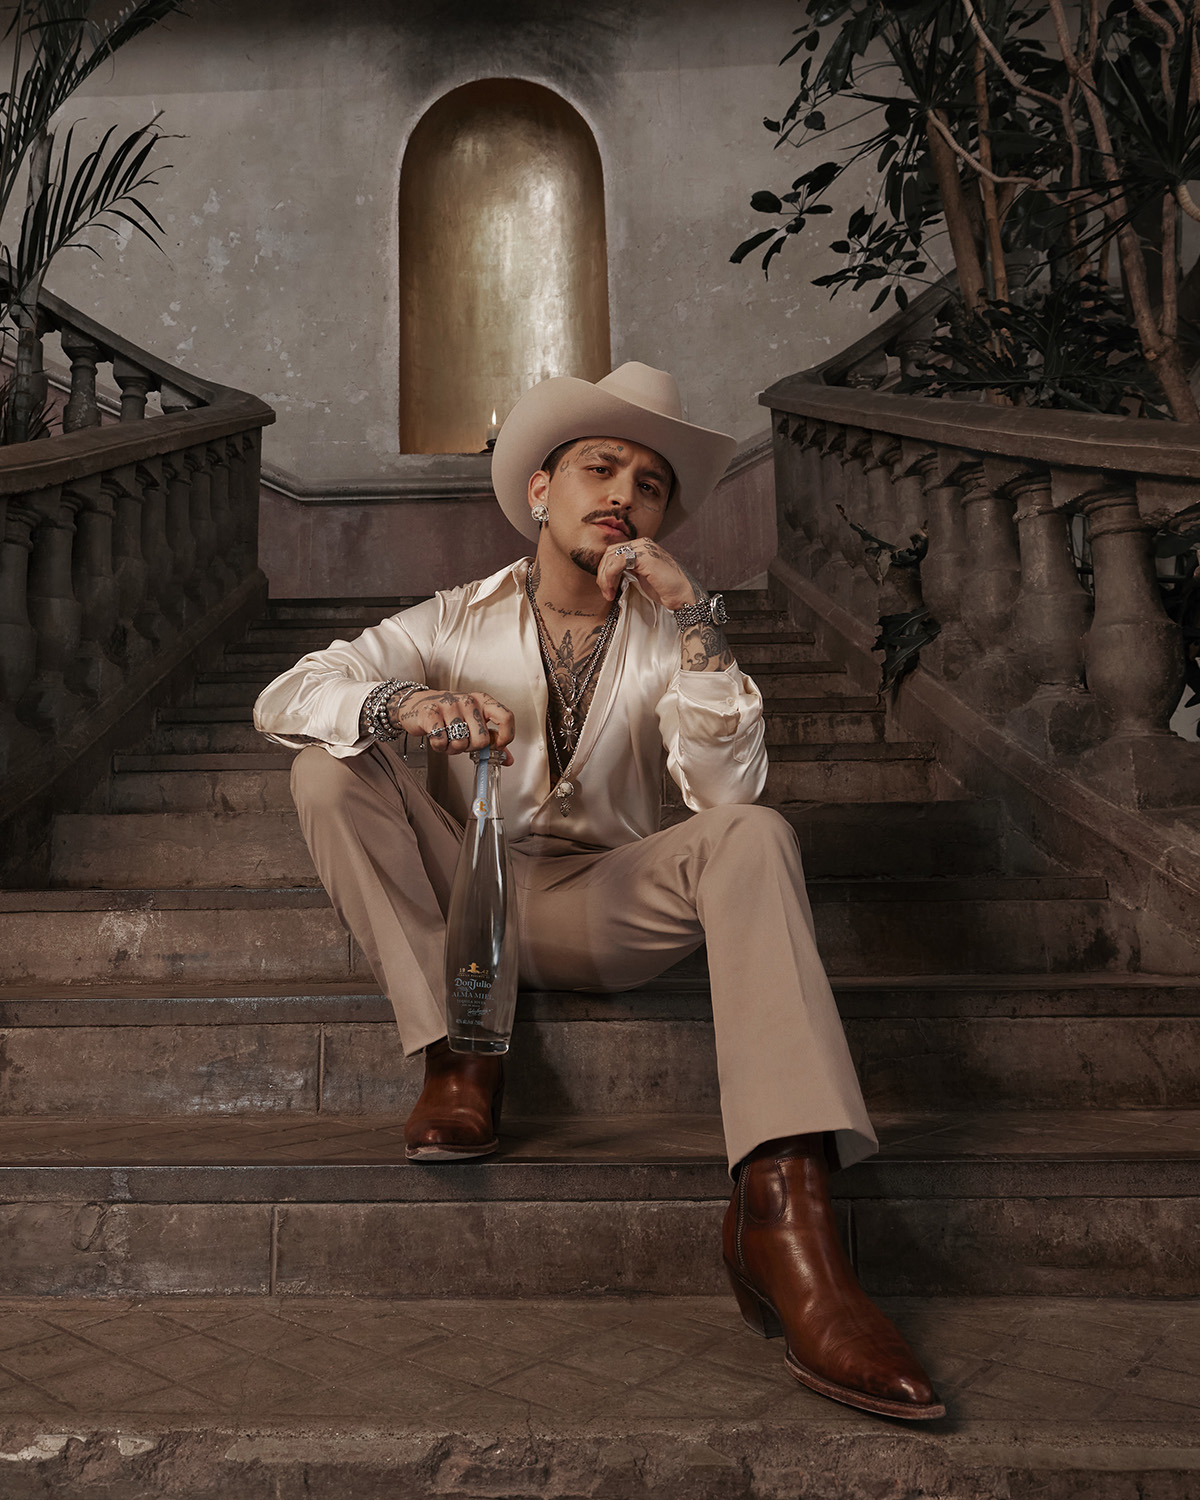 Mexican Singer-Songwriter Christian Nodal collaborates with the brand as an homage to tequila